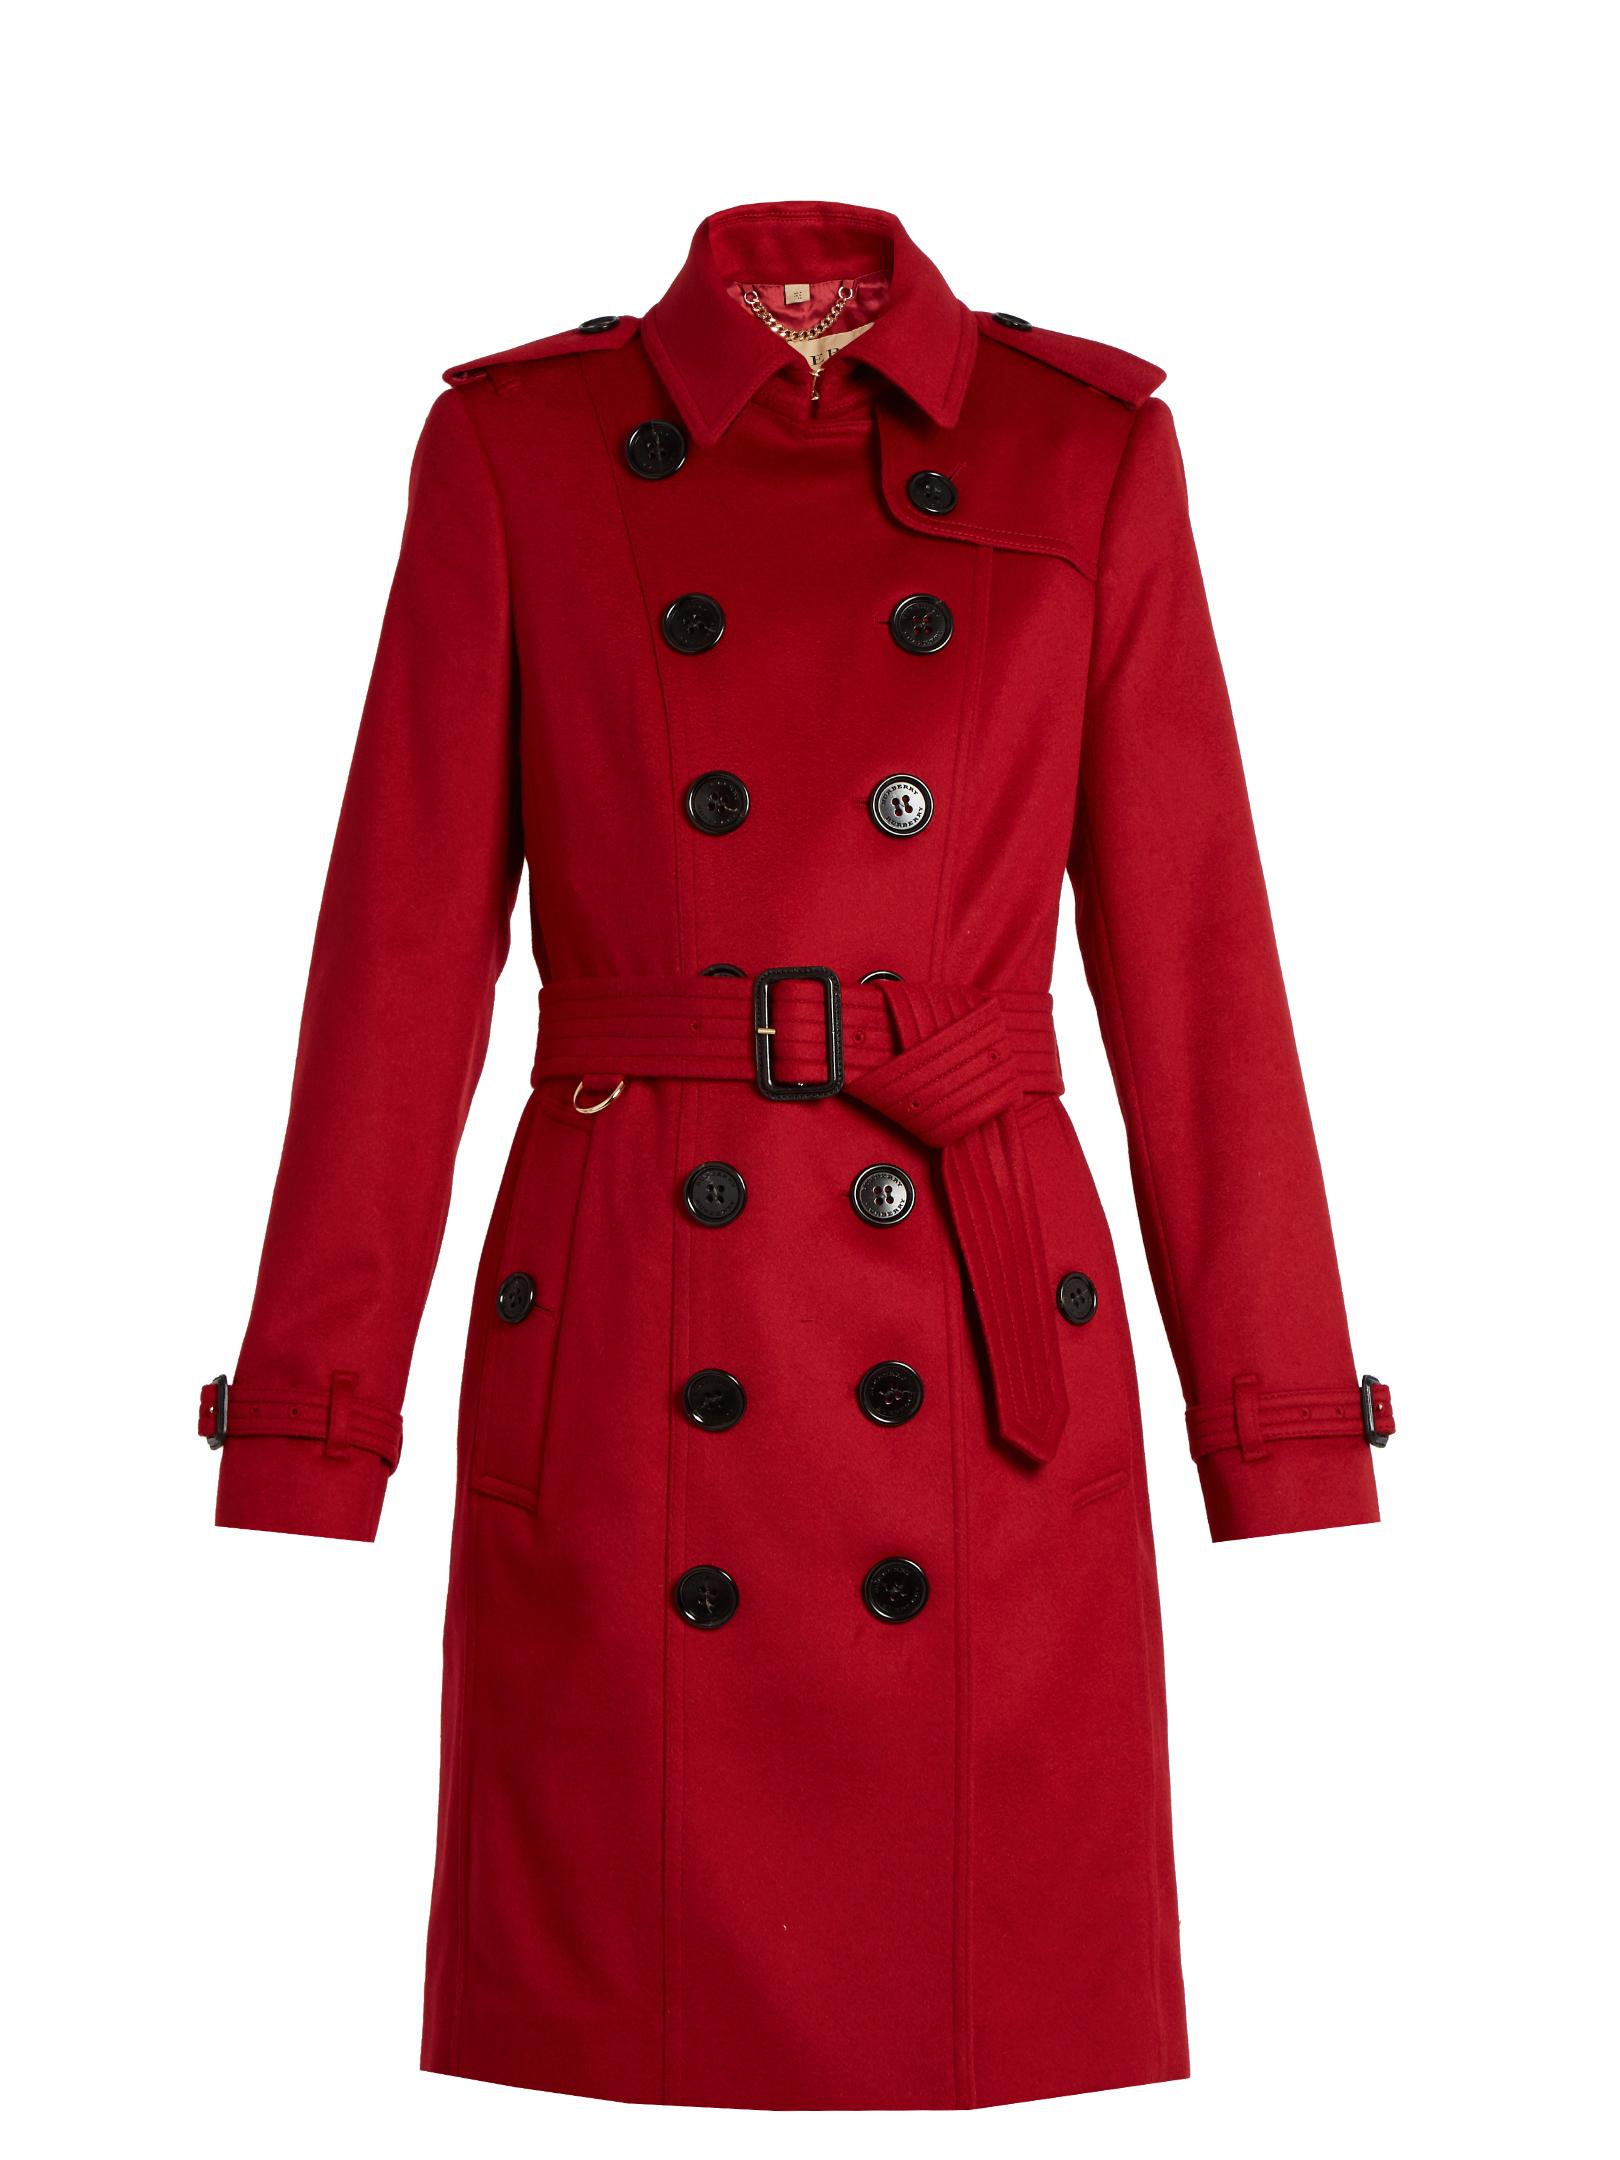 Burberry prorsum Sandringham Long Cashmere Trench Coat in Red | Lyst